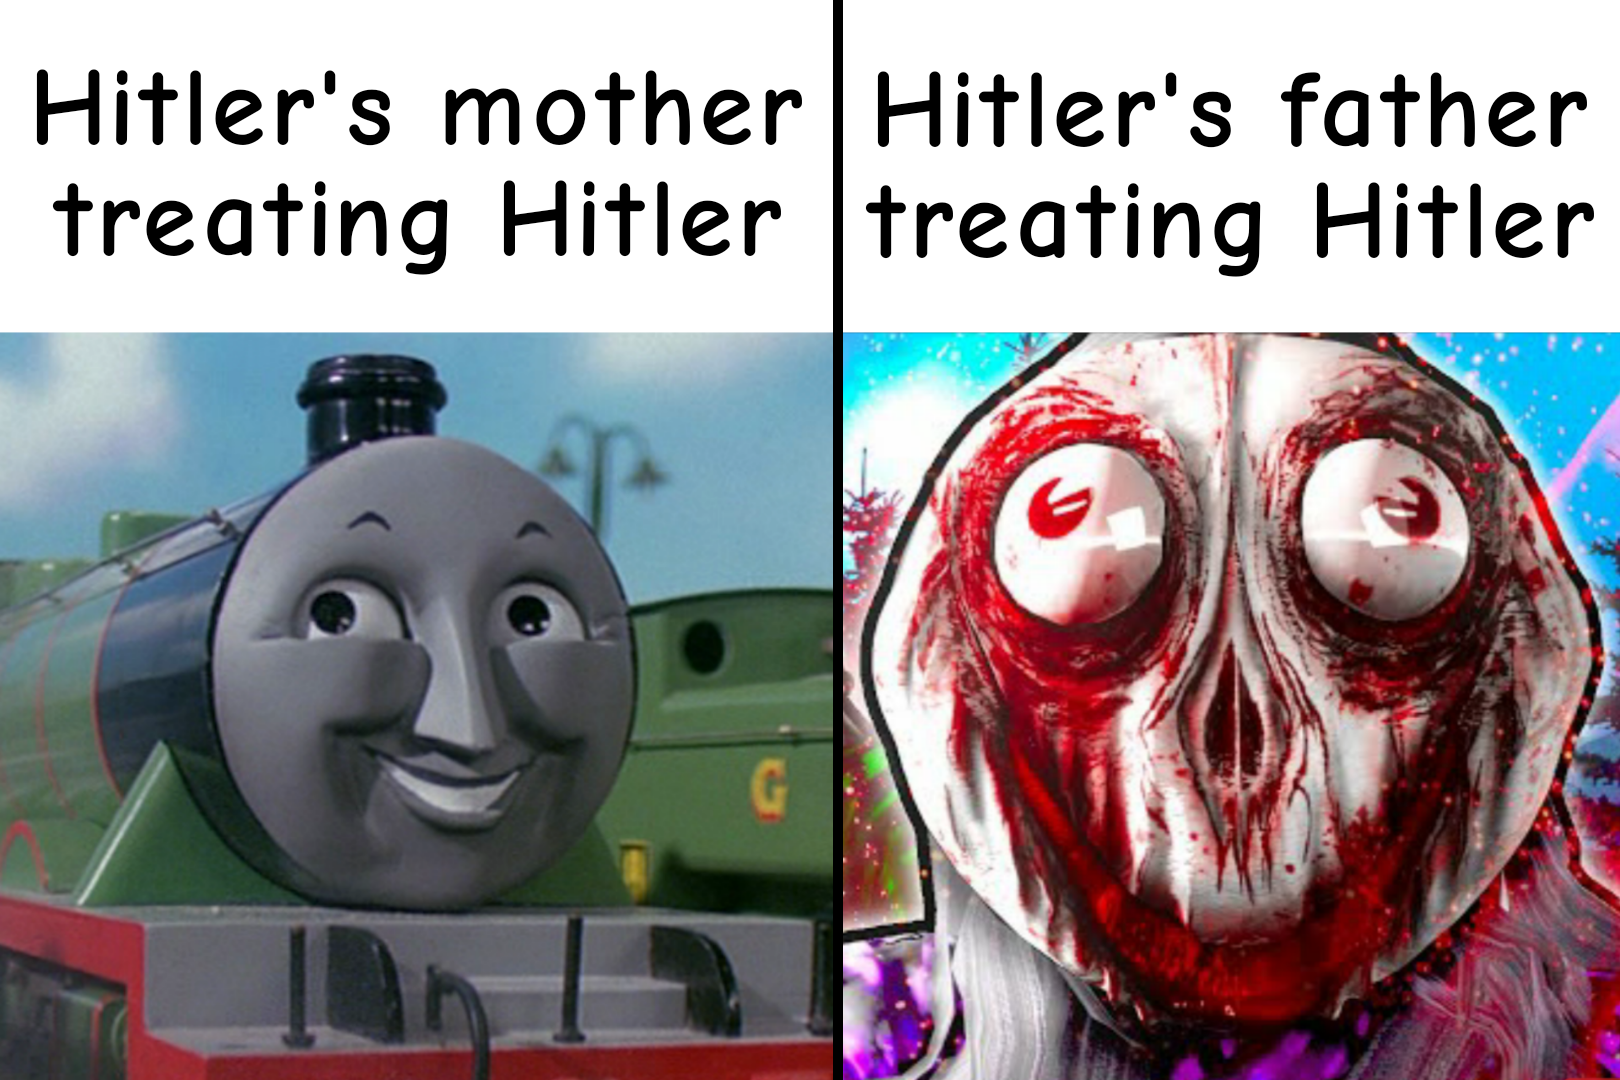 If Alois Hitler didn't spank his son's ass 24/7 then he maybe wouldn't have been such a horrible monster